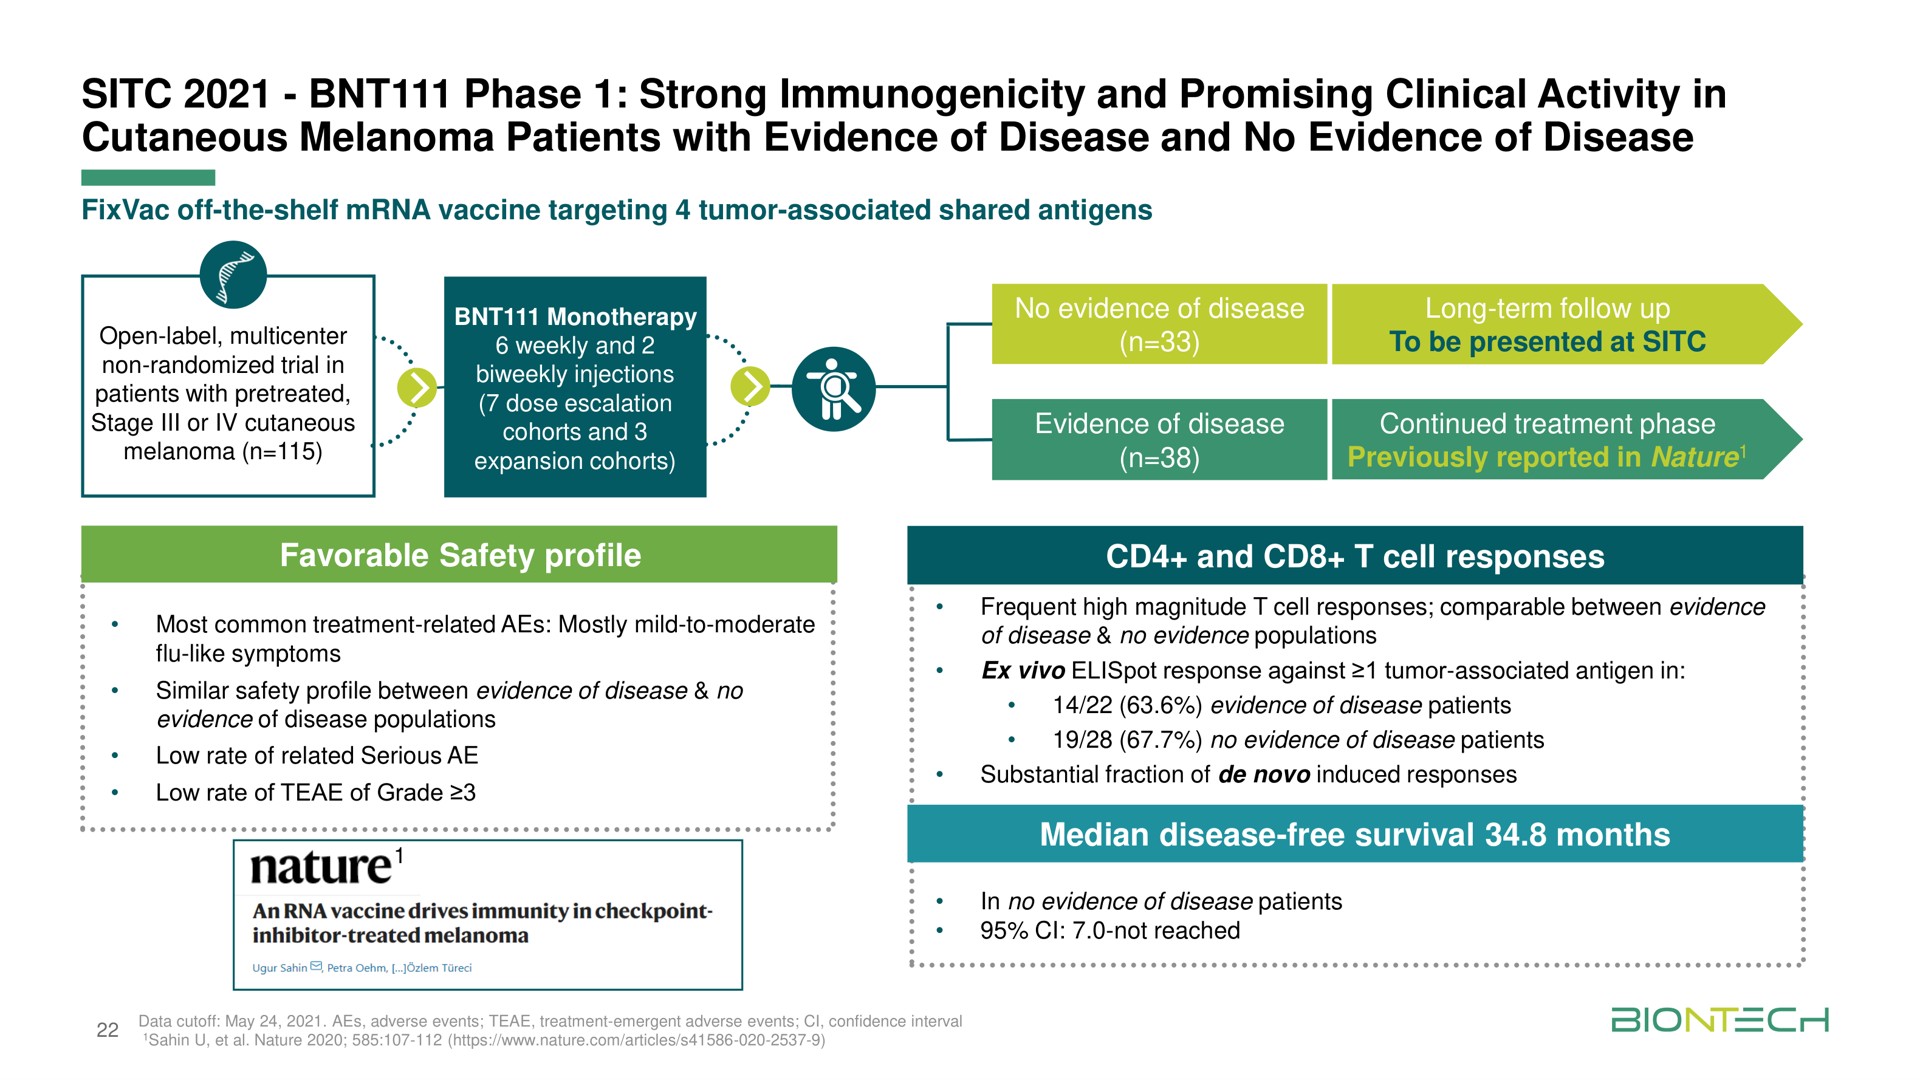 phase strong immunogenicity and promising clinical activity in cutaneous melanoma patients with evidence of disease and no evidence of disease nature | BioNTech